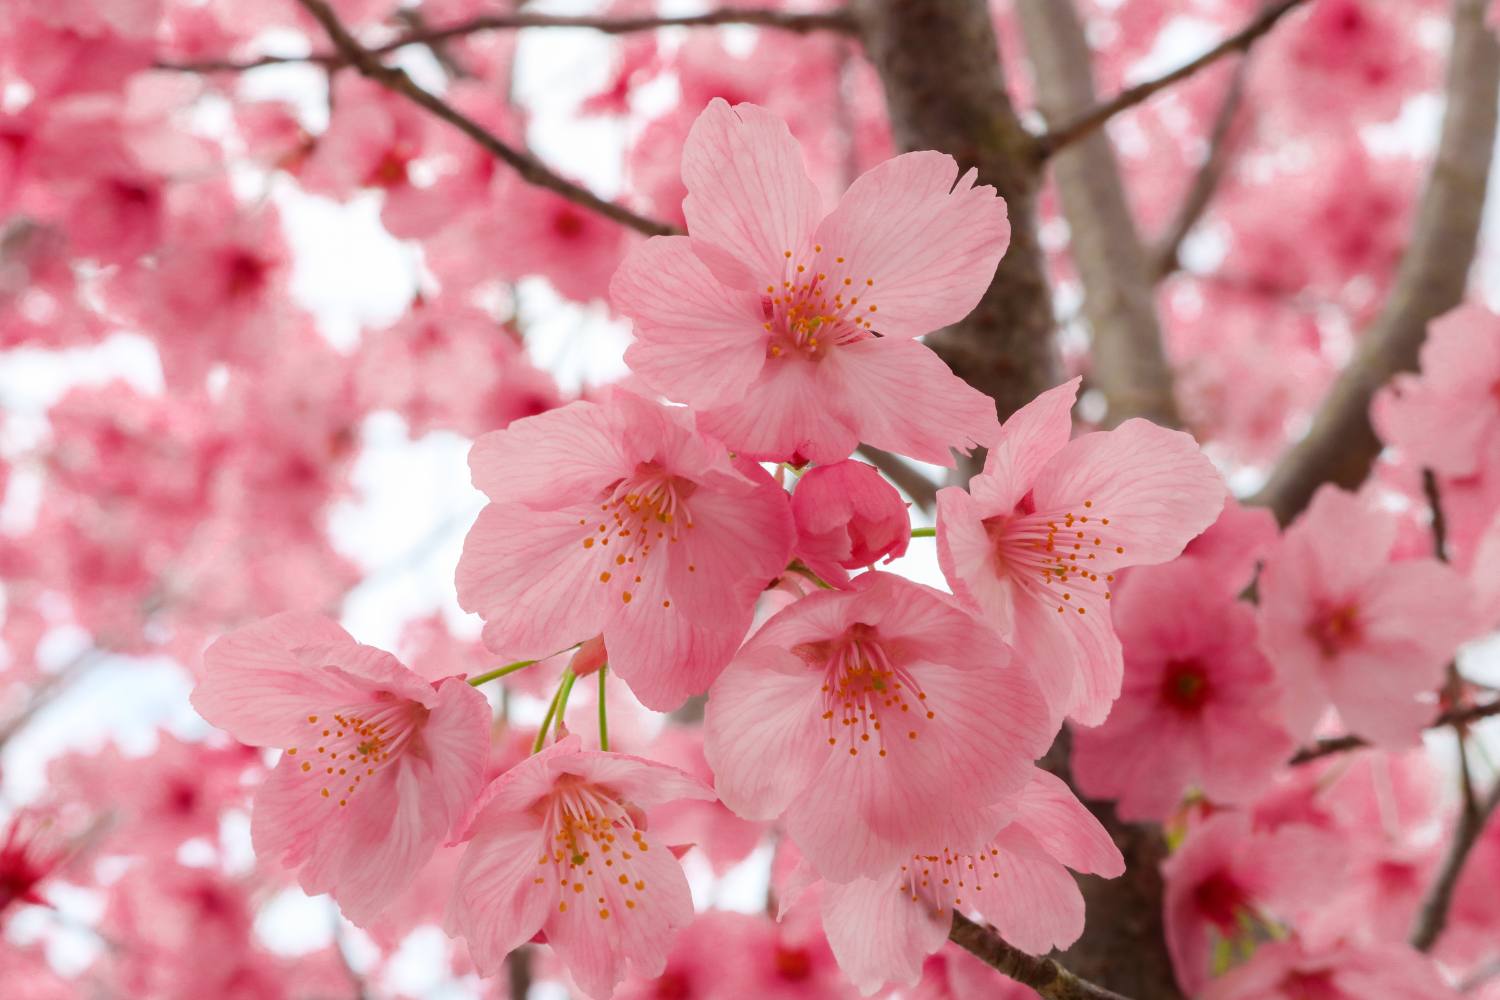 Close up image of pink cherry blossoms.